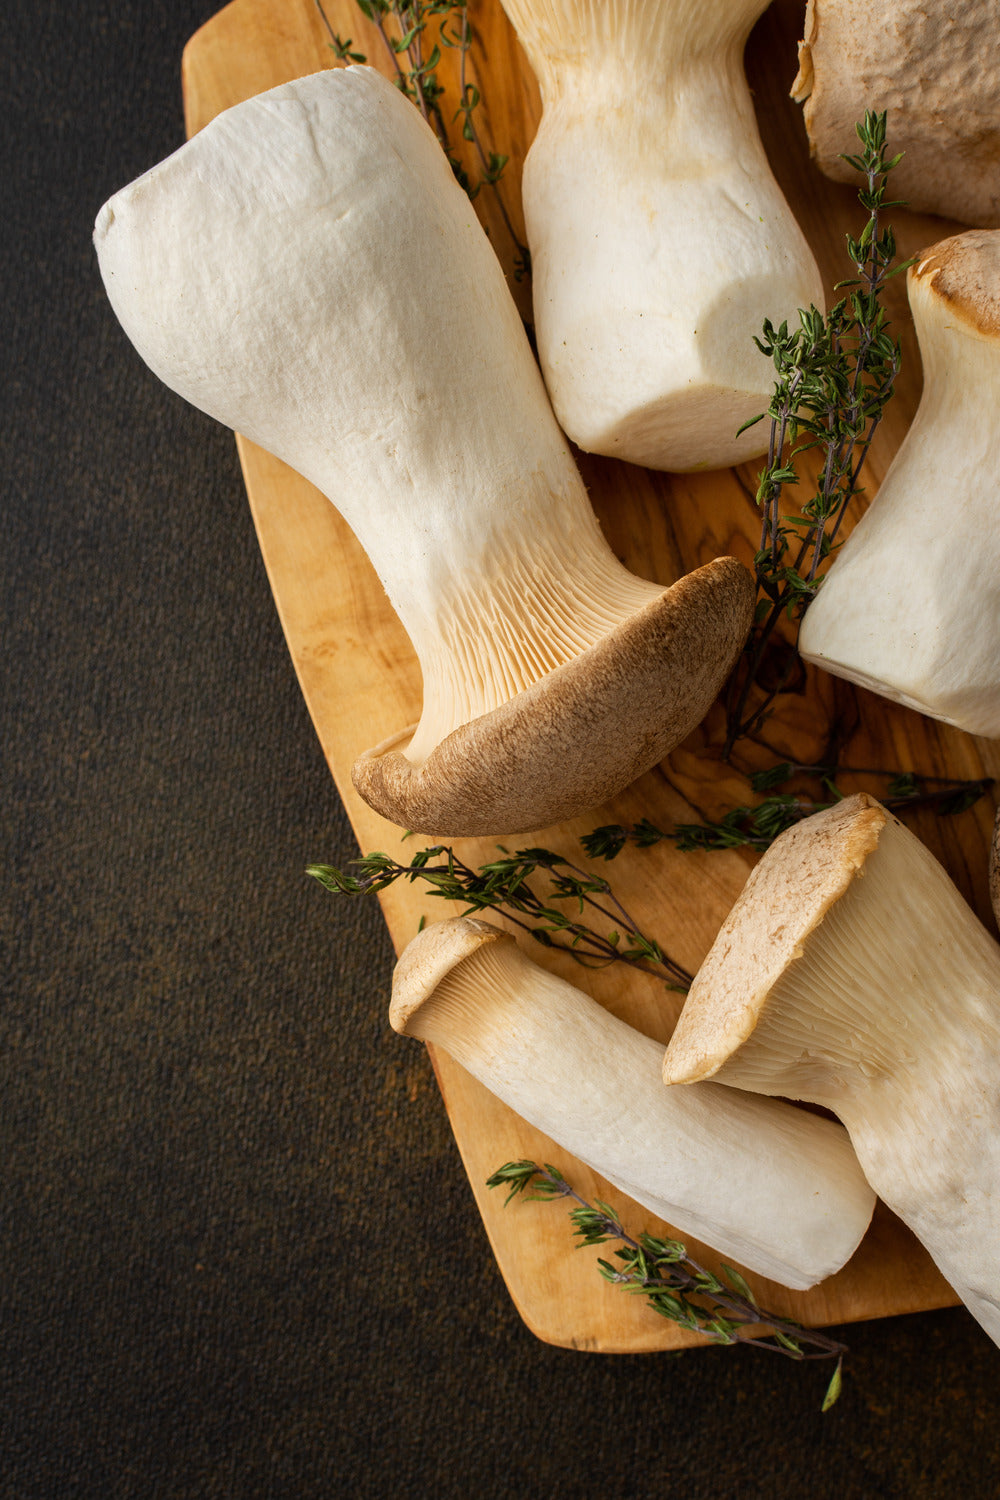 Oyster mushrooms sitting on cutting board with sprigs of rosemary